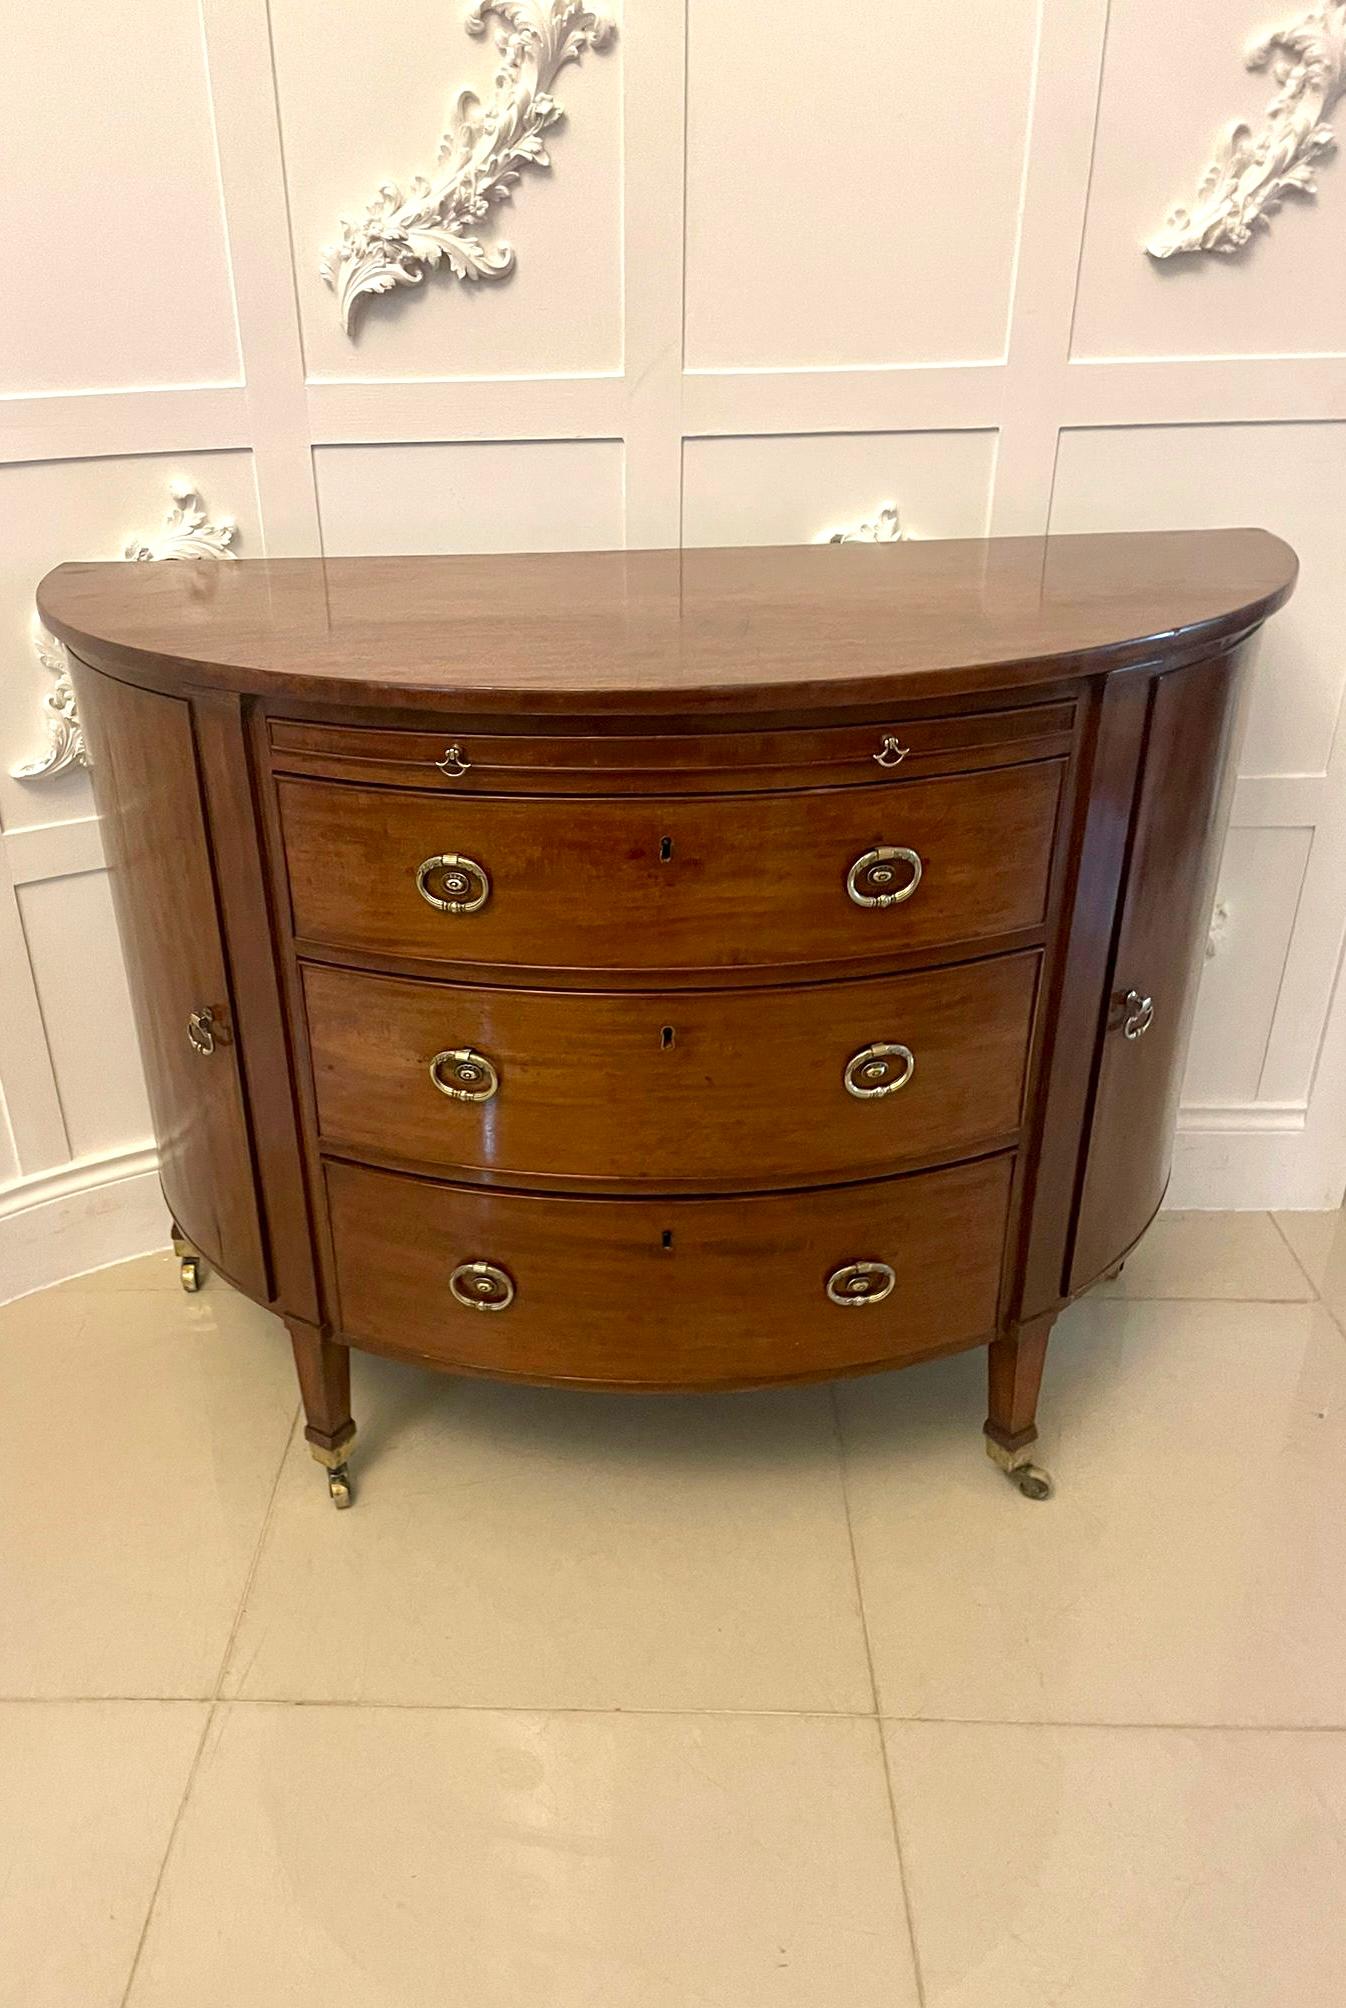 Antique George III quality mahogany demi lune shaped commode/chest of drawers having a quality mahogany demi lune shaped top above a blushing slide and three mahogany cockbeeded oak lined drawers with ornate brass handles flanked by cupboard doors